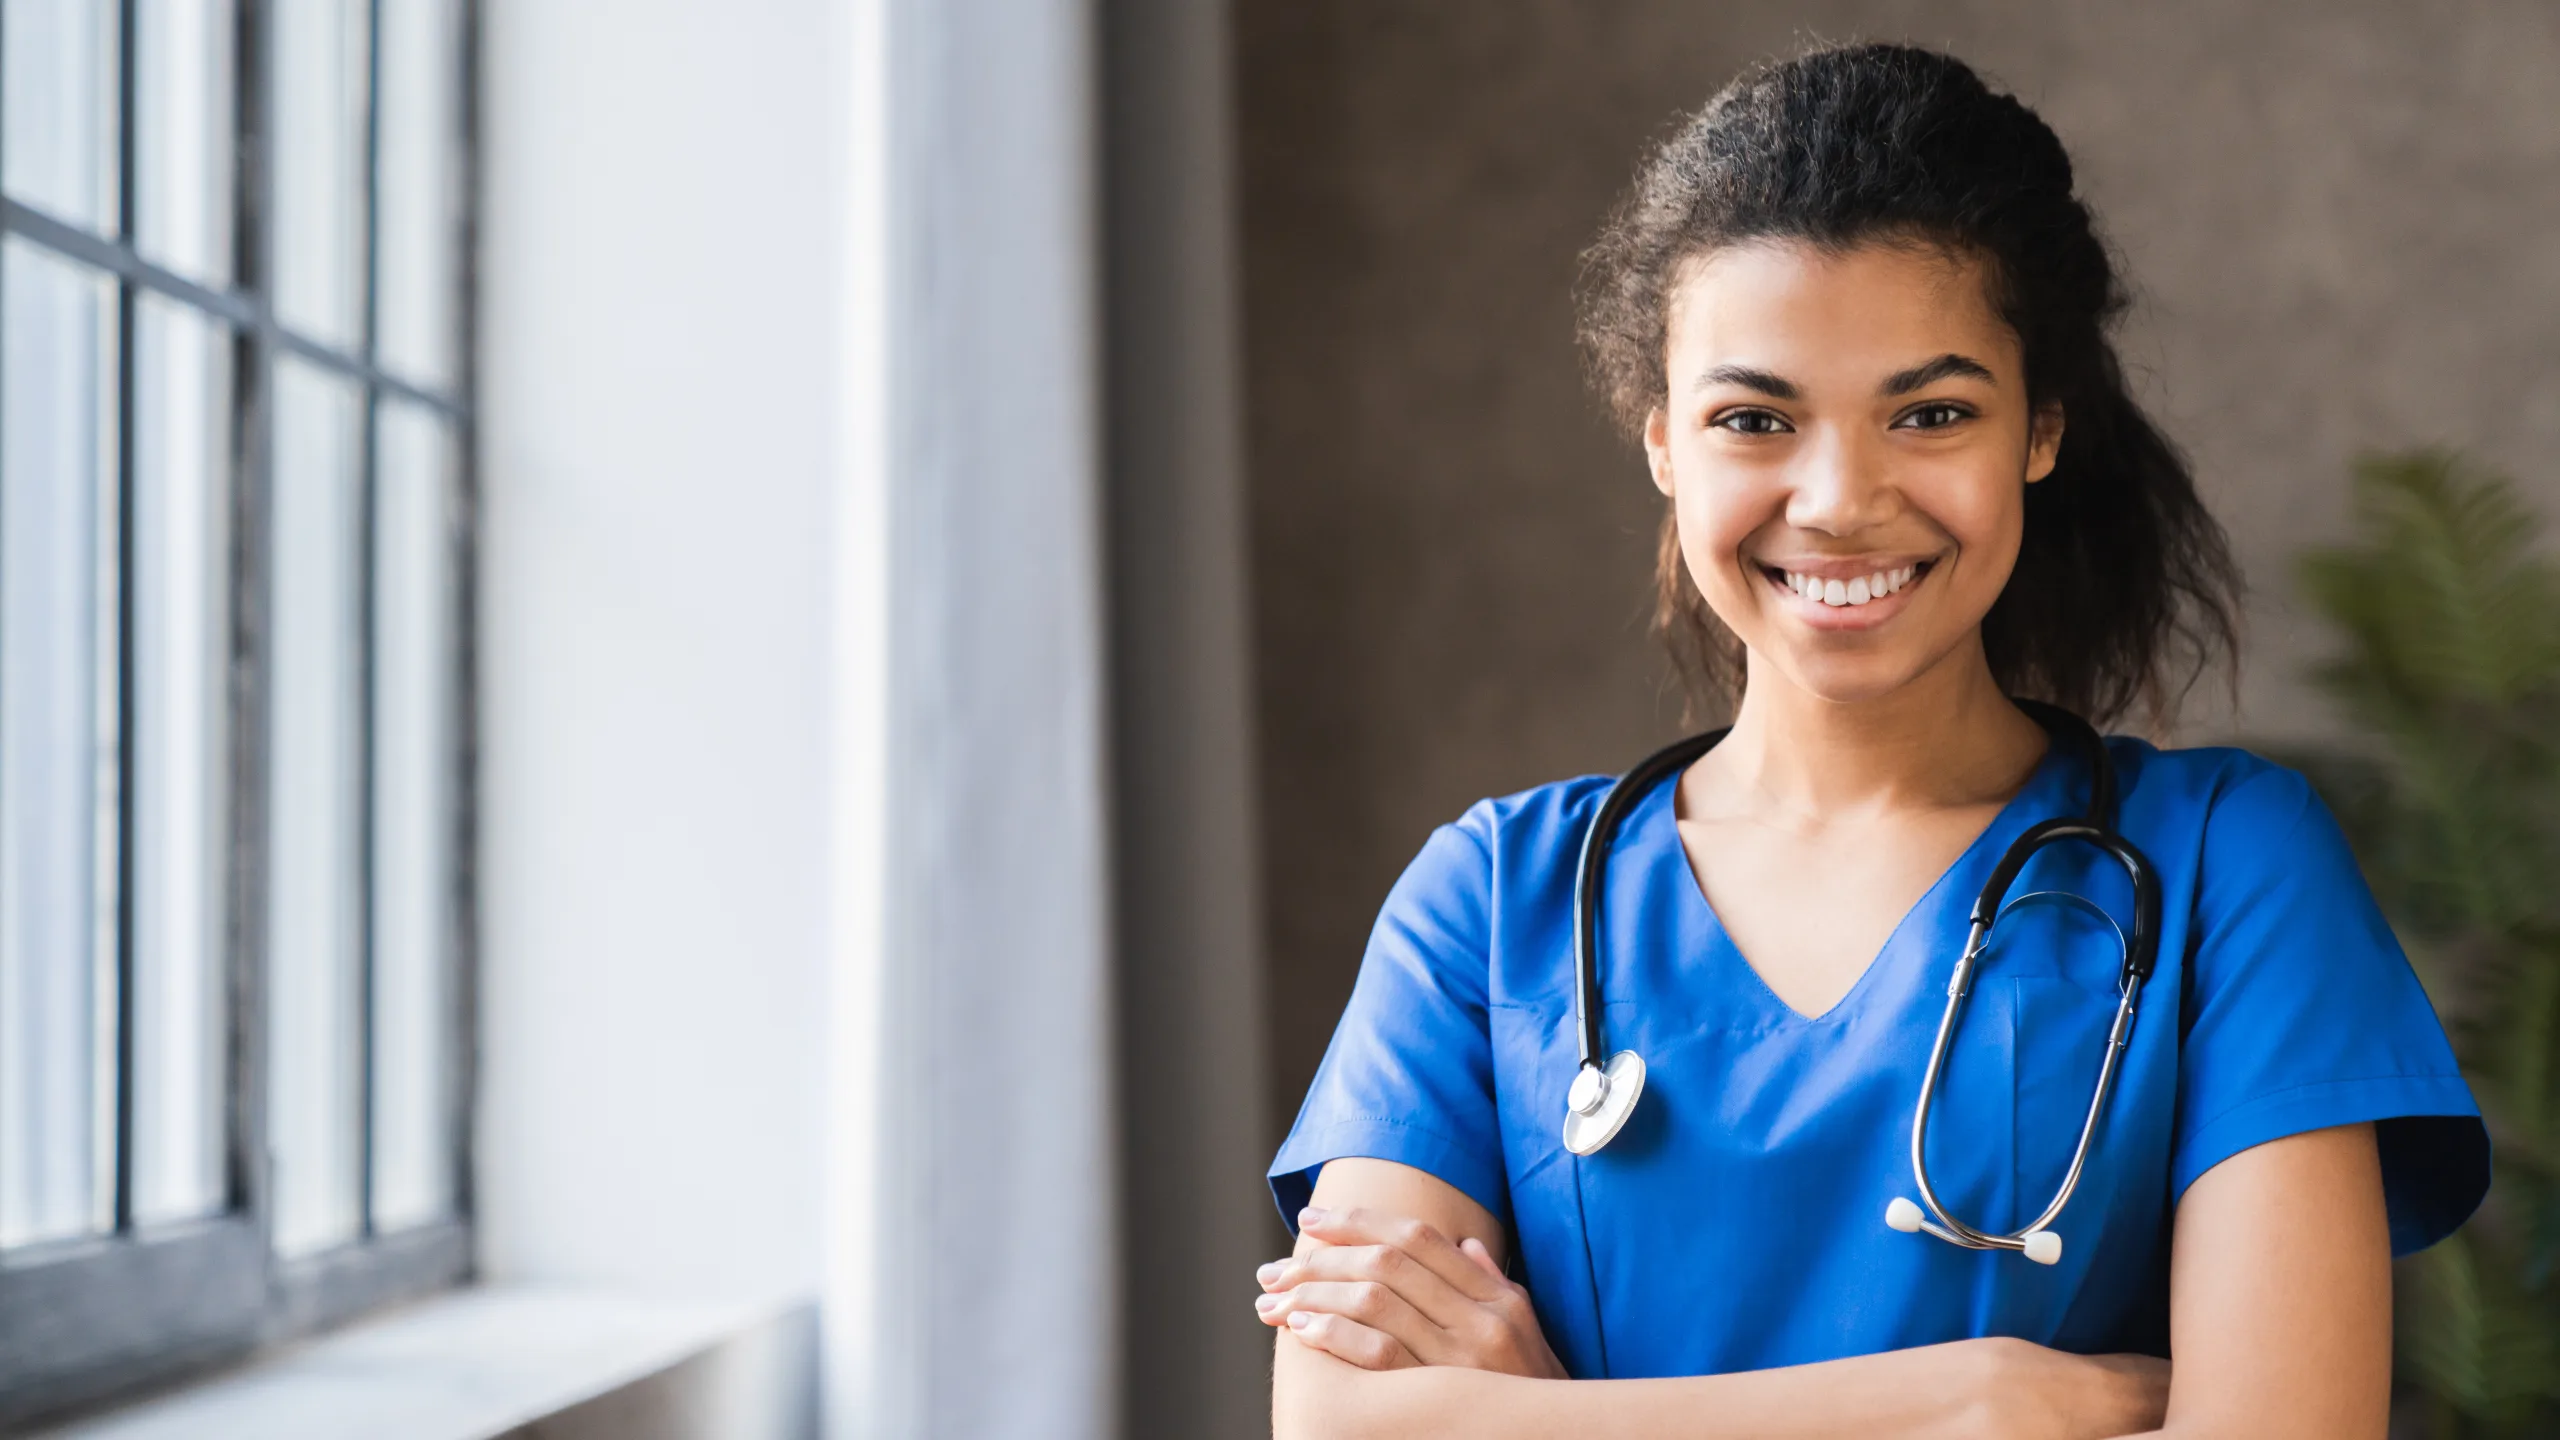 female doctor smiling with stethoscope on and a hospital background